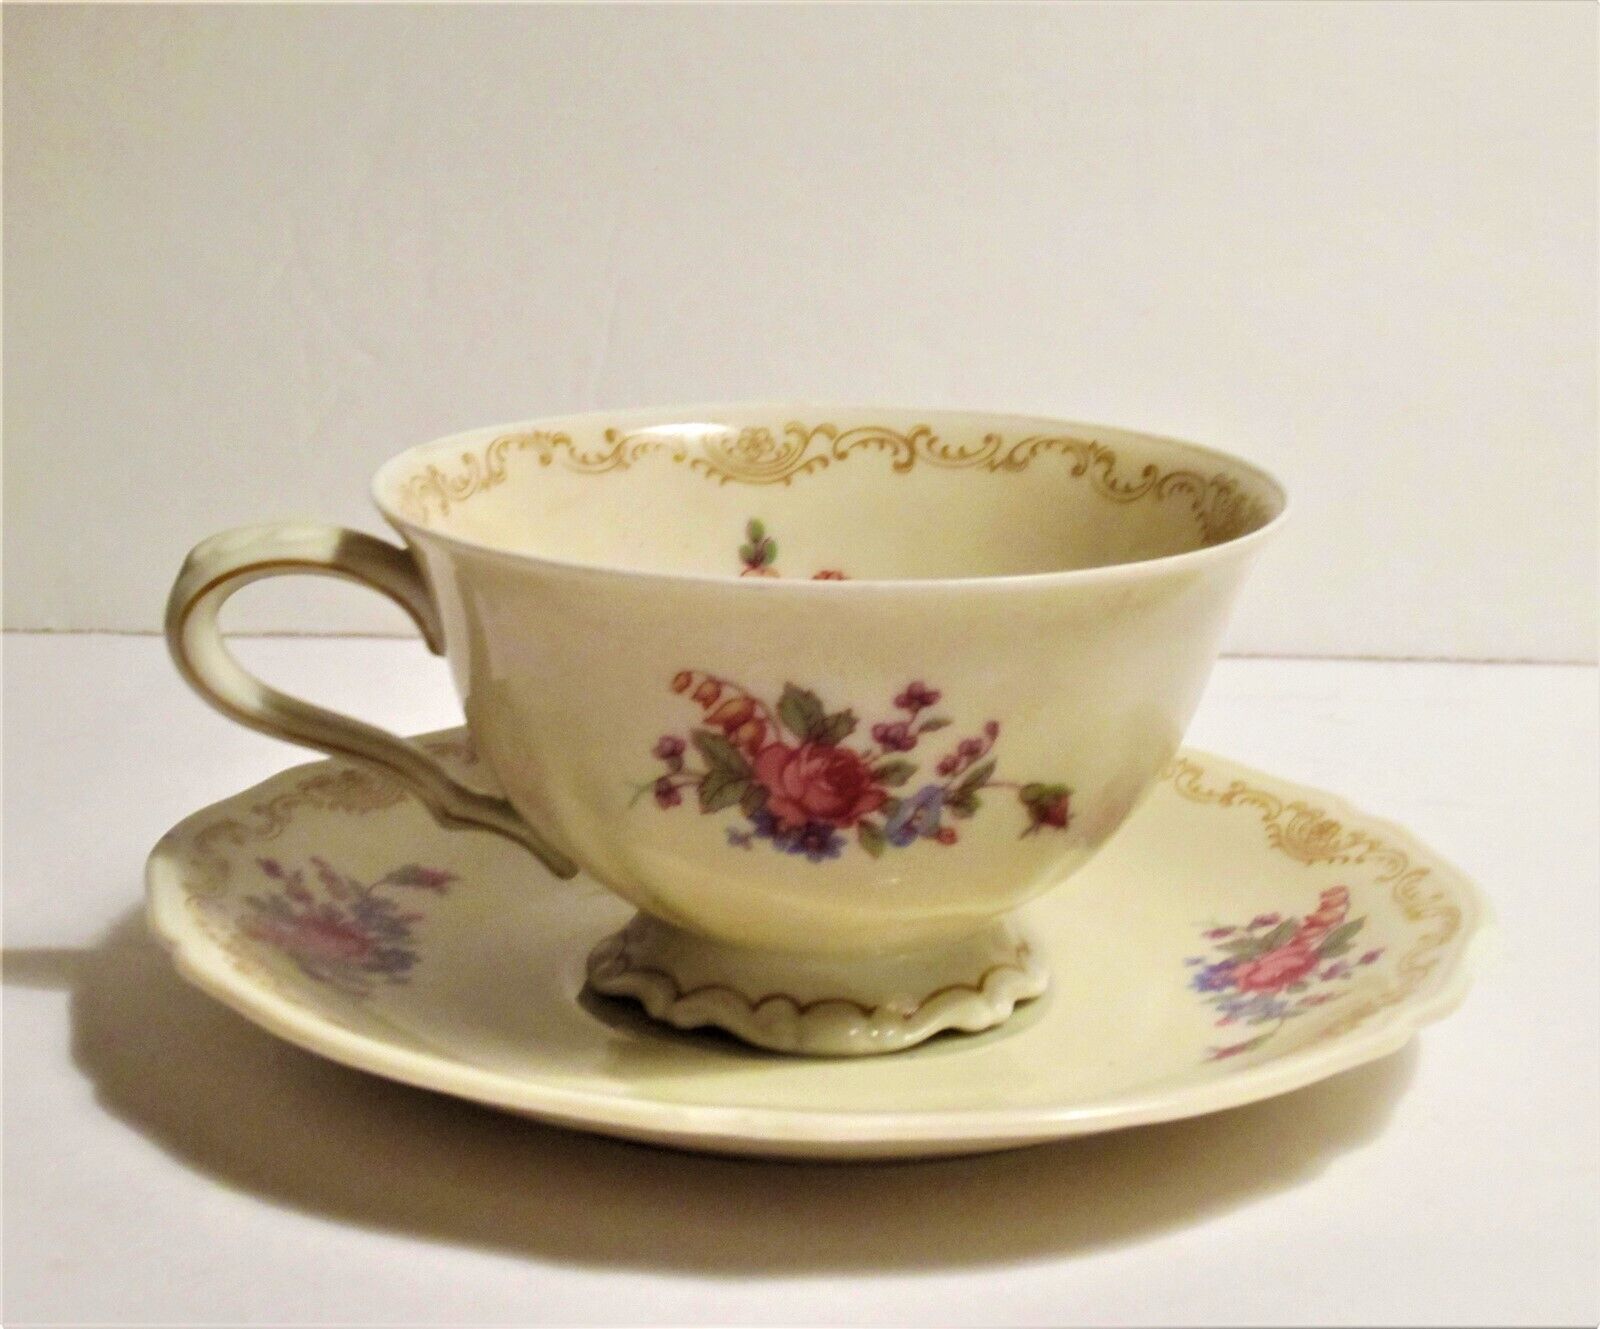  VINTAGE HUTSCHENREUTHER SELB US ZONE TEA CUP AND SAUCER ROSES BAVARIA GERMANY